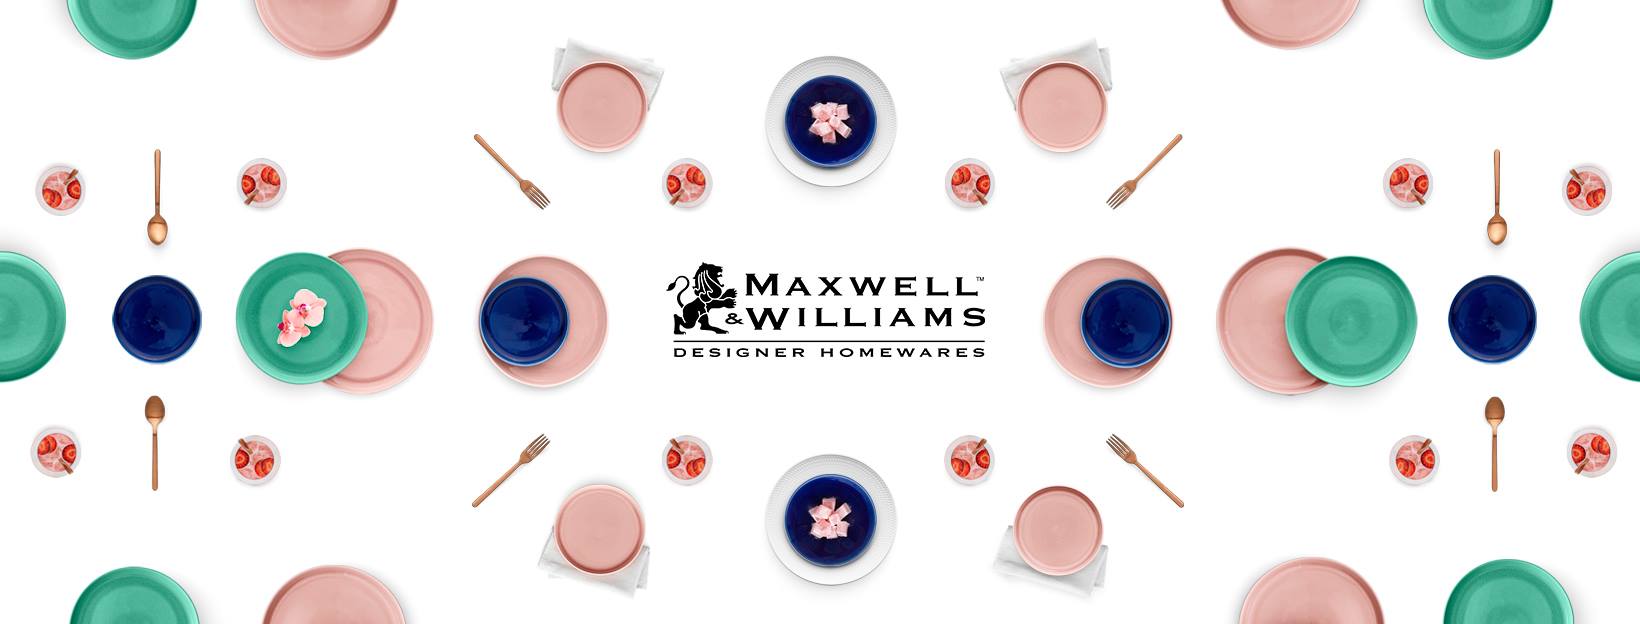 Maxwell & Williams extra $10 OFF on your first order when you sign up